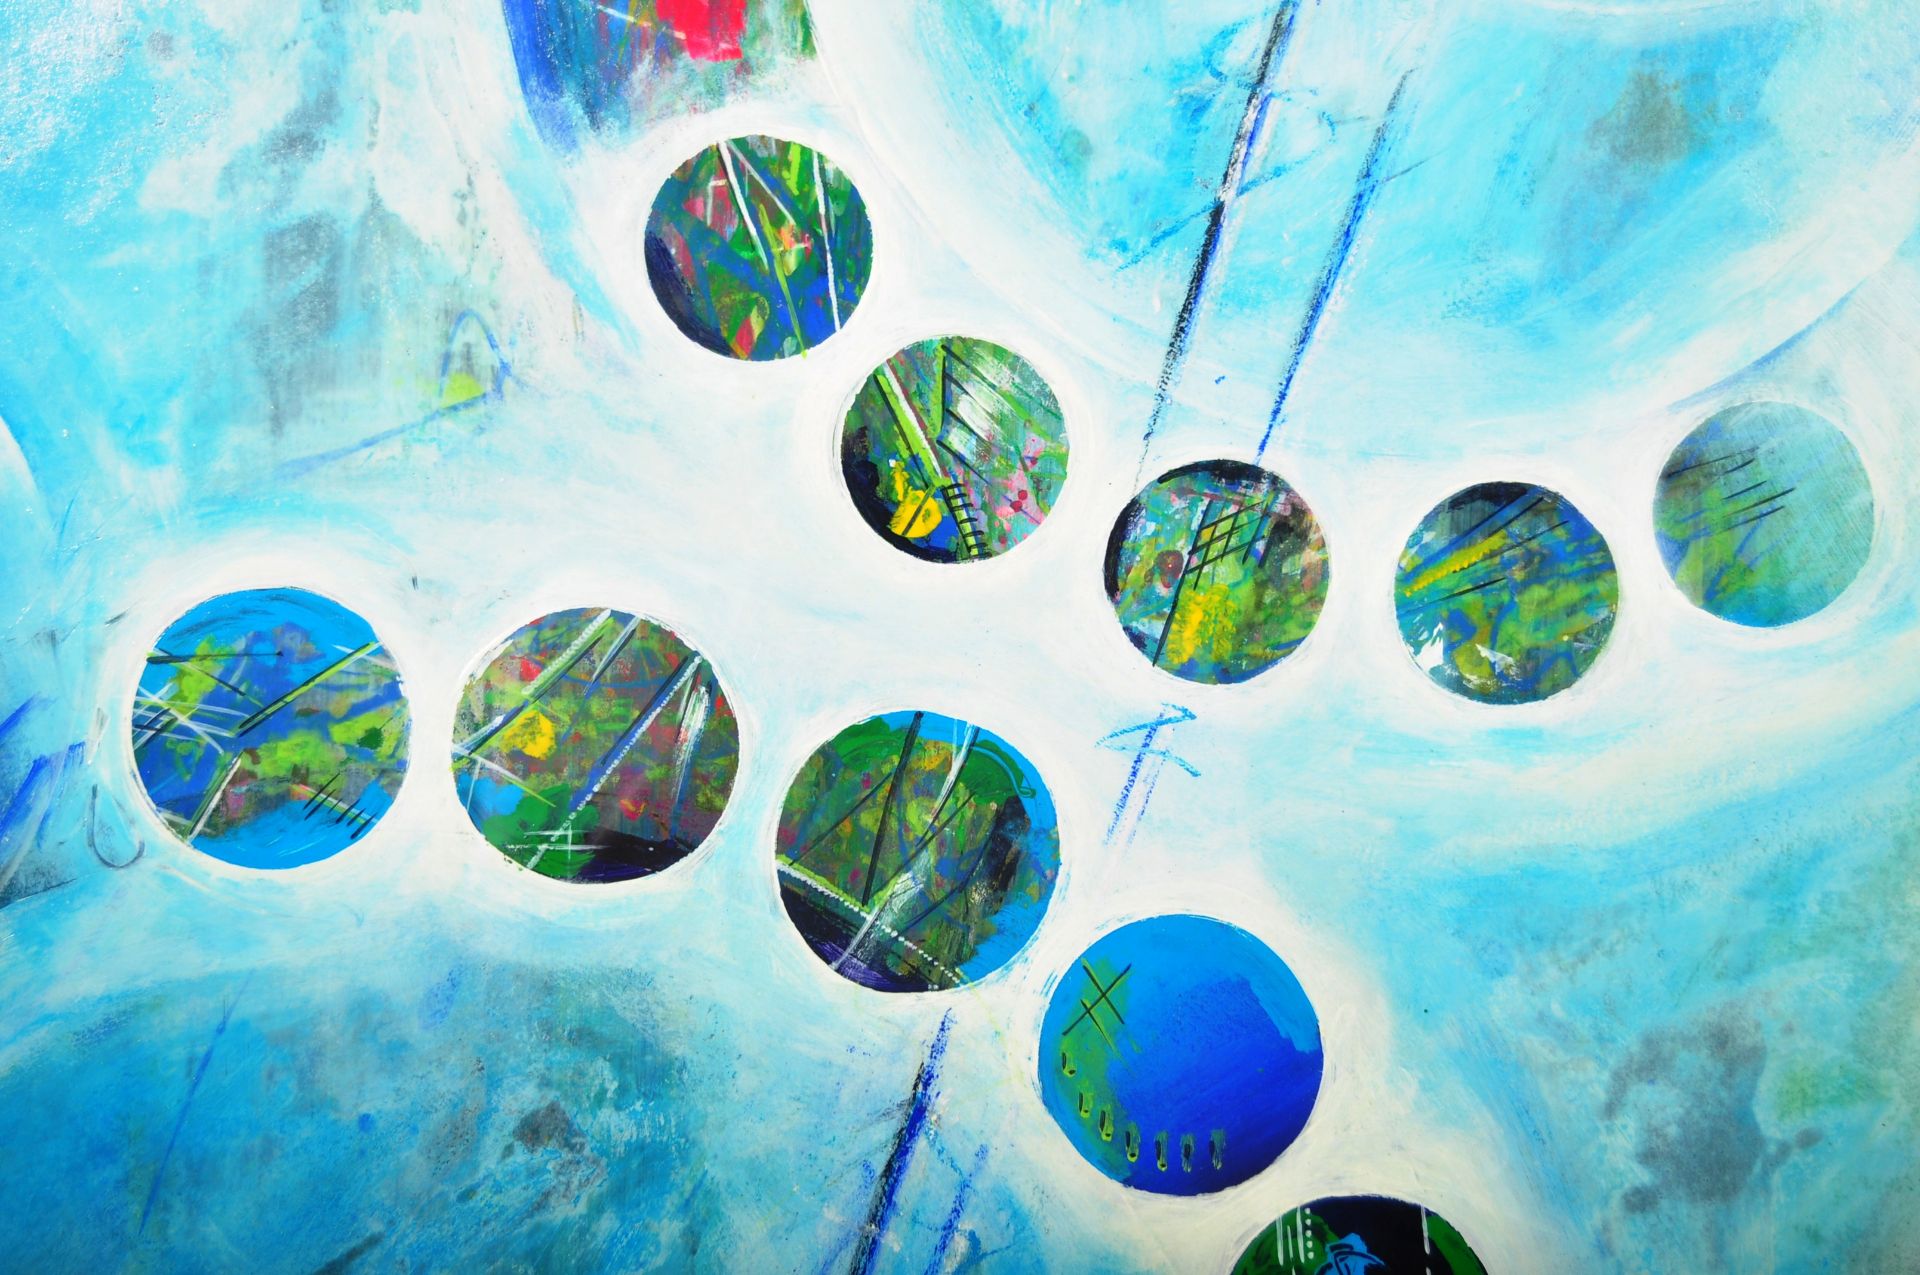 CONTEMPORARY MIXED MEDIA ABSTRACT ART PAINTING DEPICTING PLANETS - Image 4 of 5